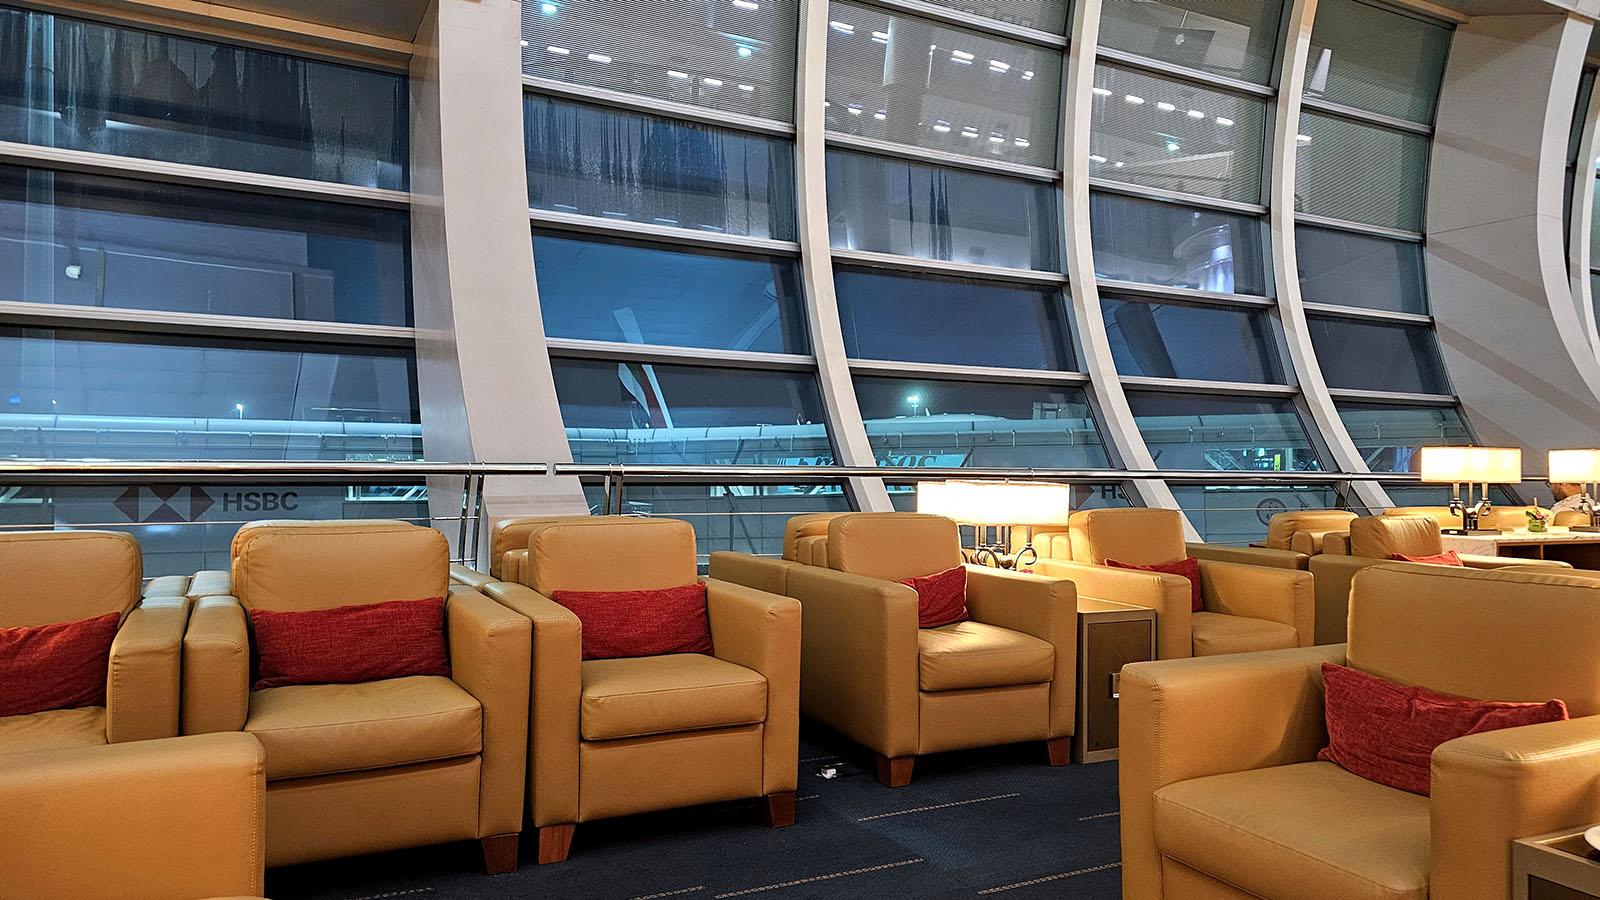 Views from the Emirates Business Class Lounge, Dubai T3 Concourse C